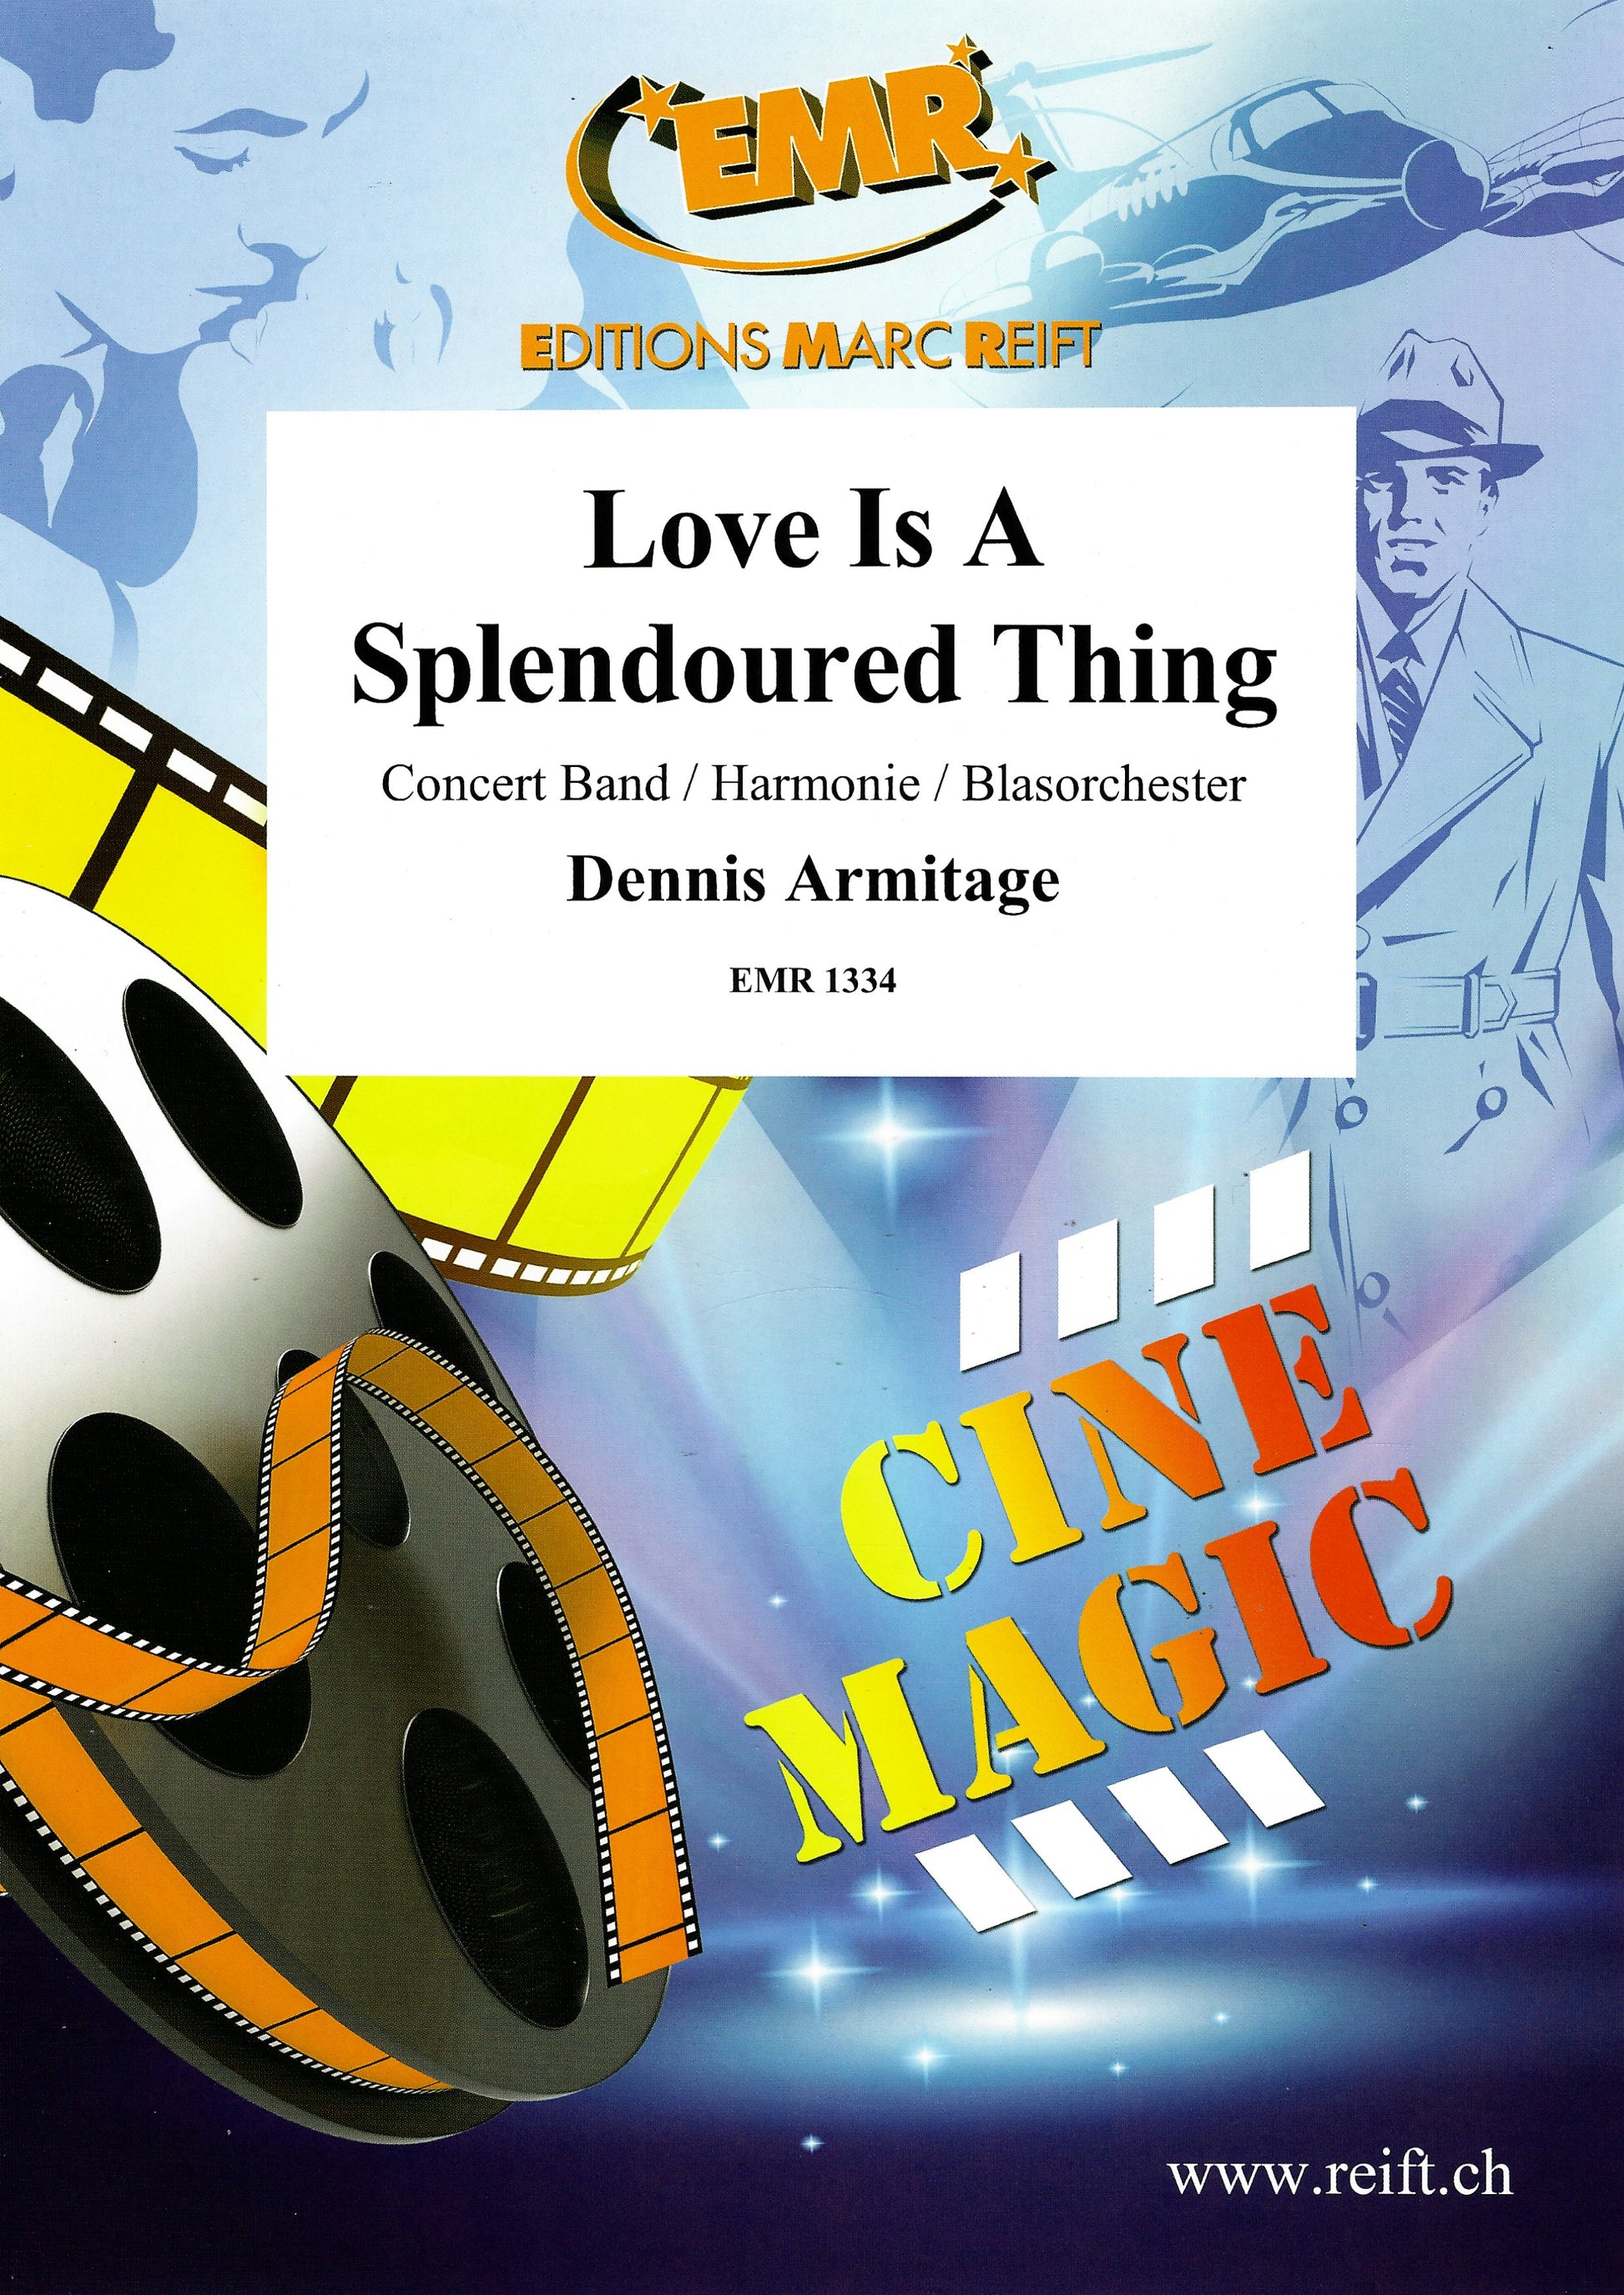 Love Is A Many Splendoured Thing